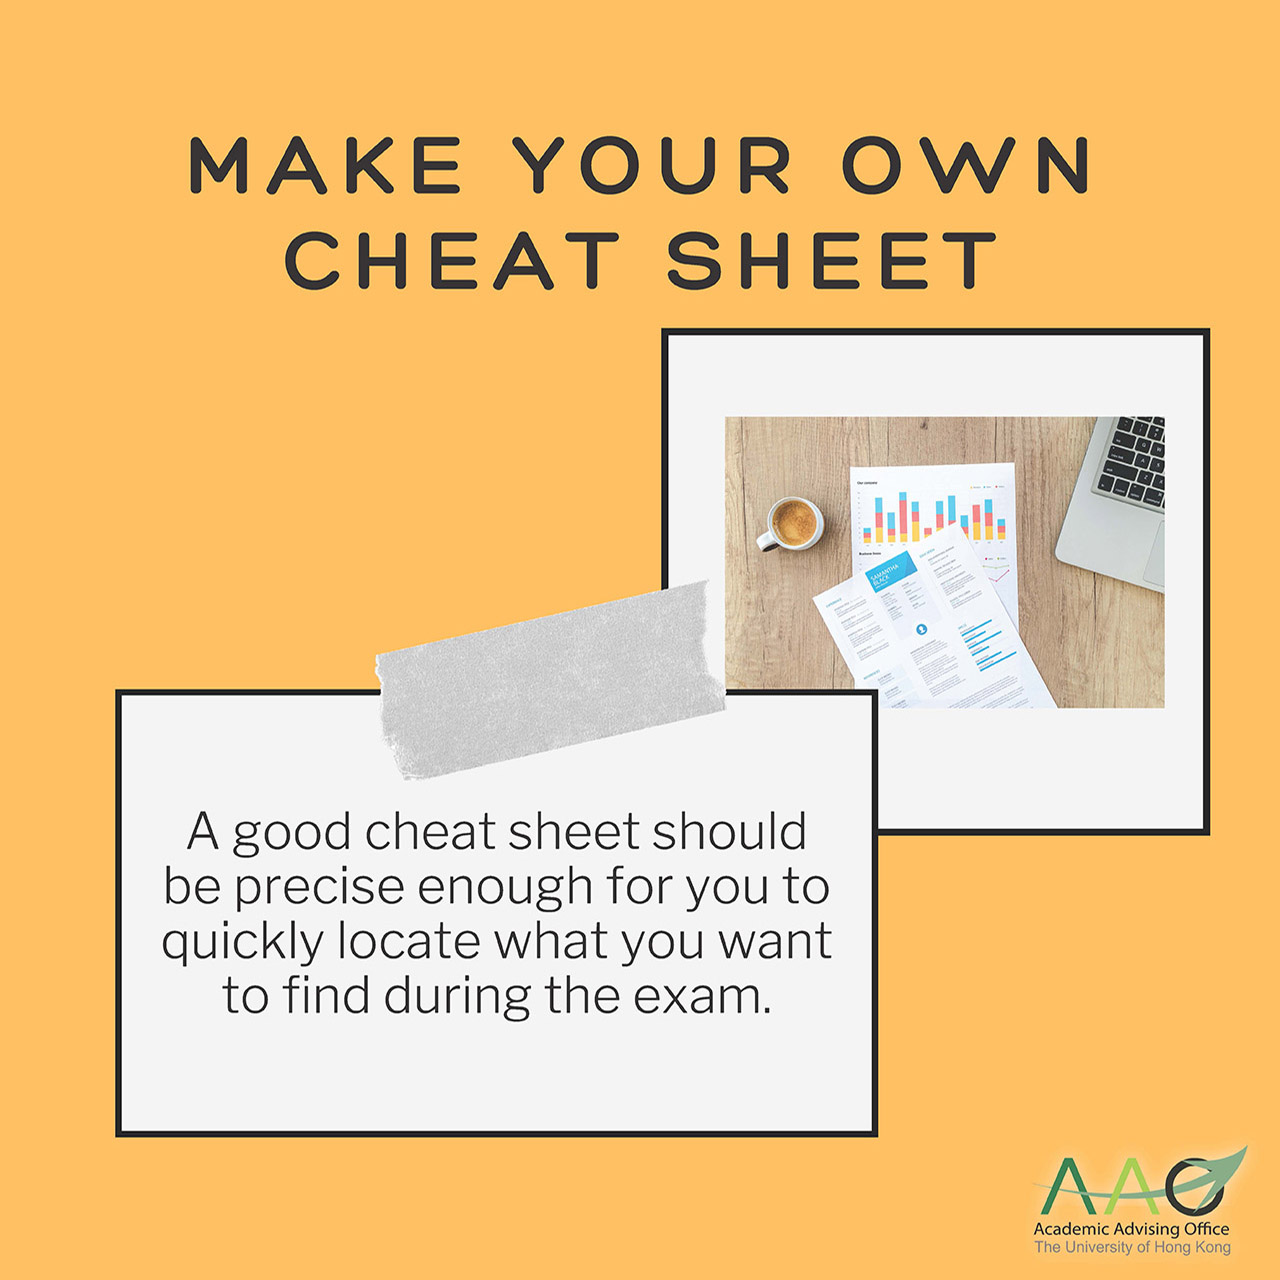 Make your own cheat sheet. A good cheat sheet should be precise enough for you to quickly locate what you want to find during the exam.